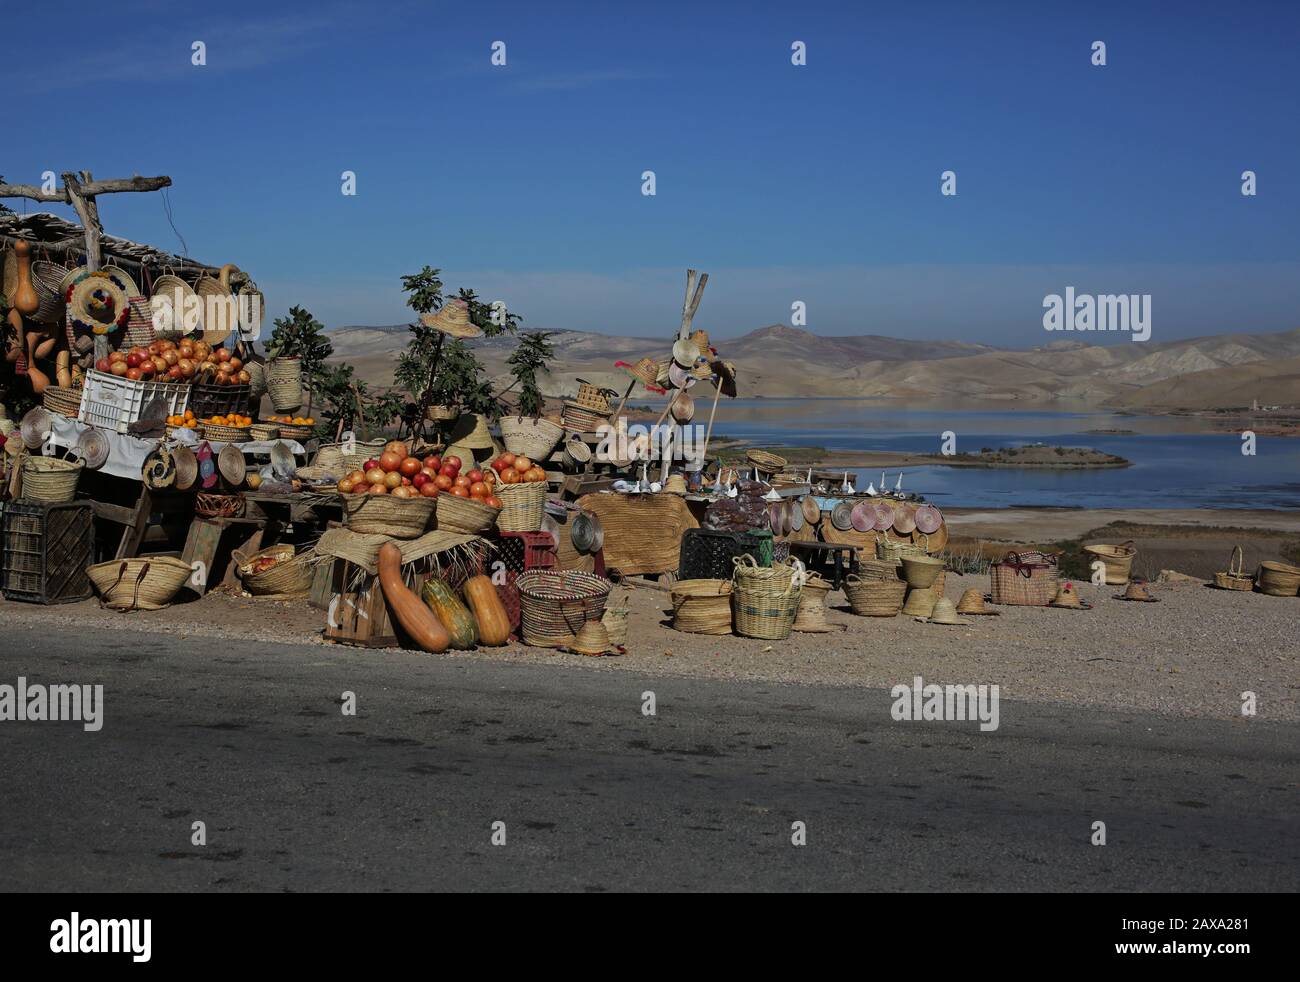 Pumpkins and persimmon fruits are pictured for sale at a roadside stall alongside the Sidi Chahed dam reservoir pictured outside Fez in Morocco. Stock Photo